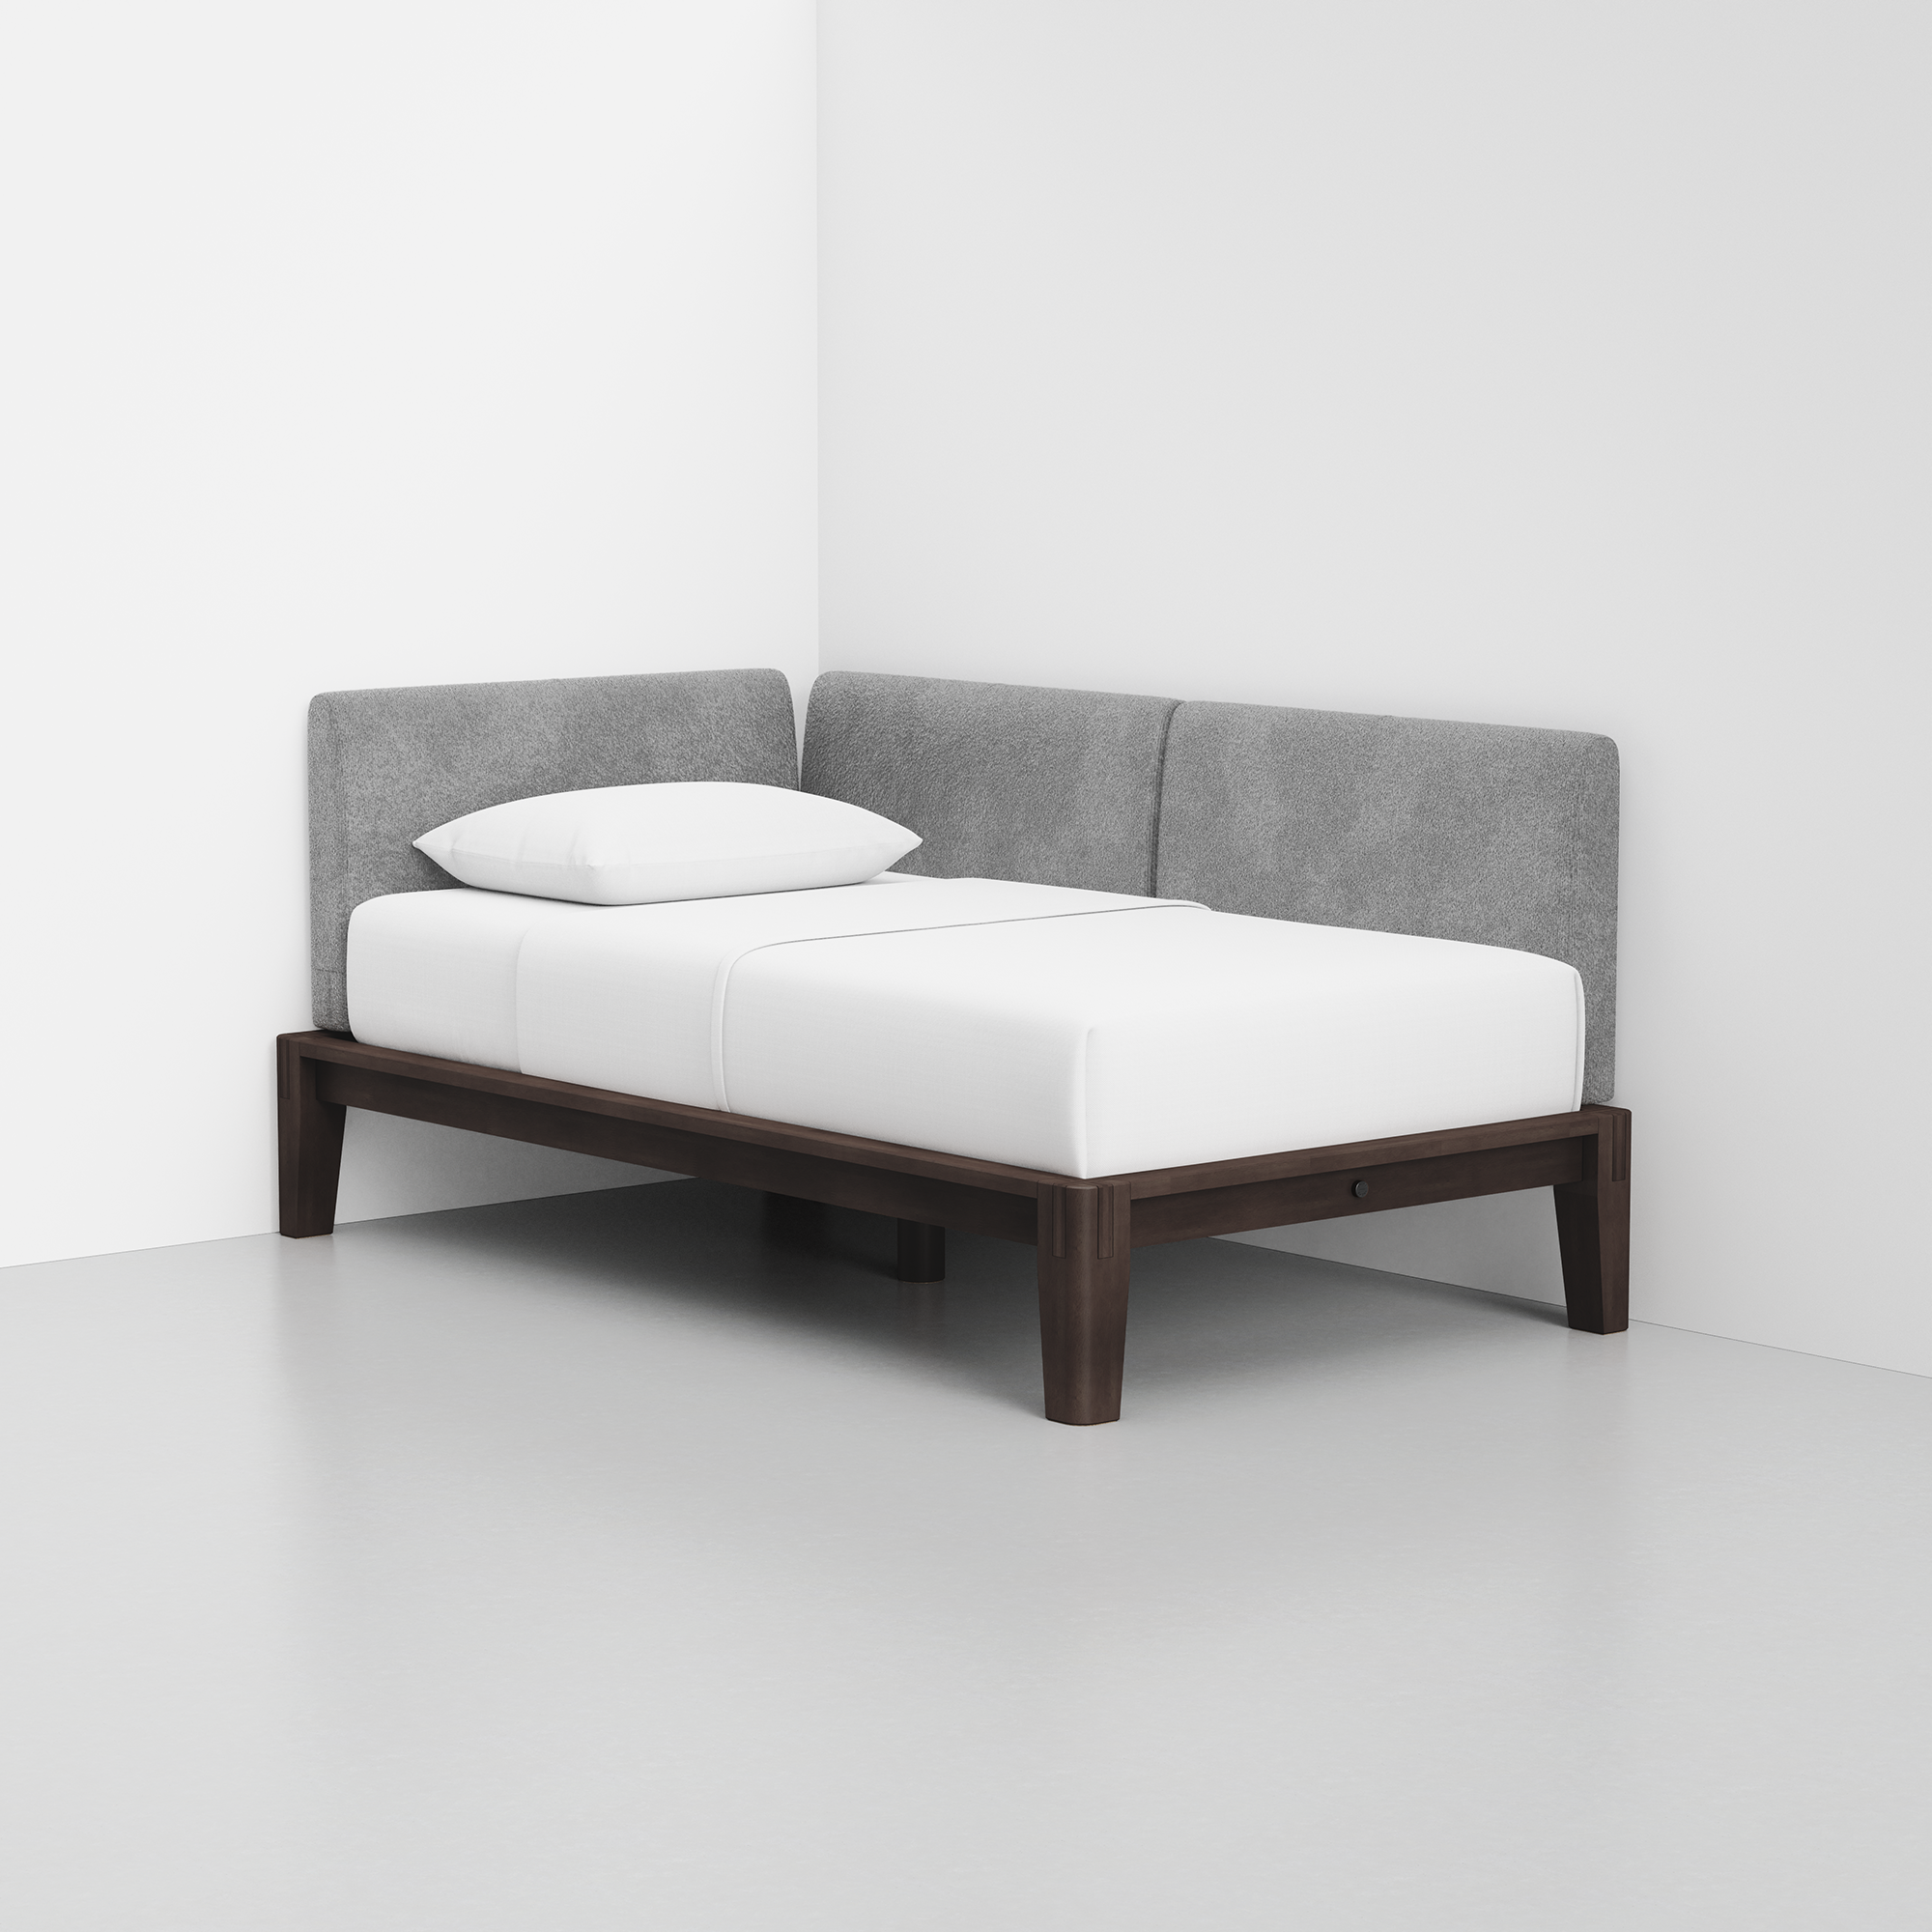 PDP Image: The Daybed (Espresso / Pewter) - Rendering - Front